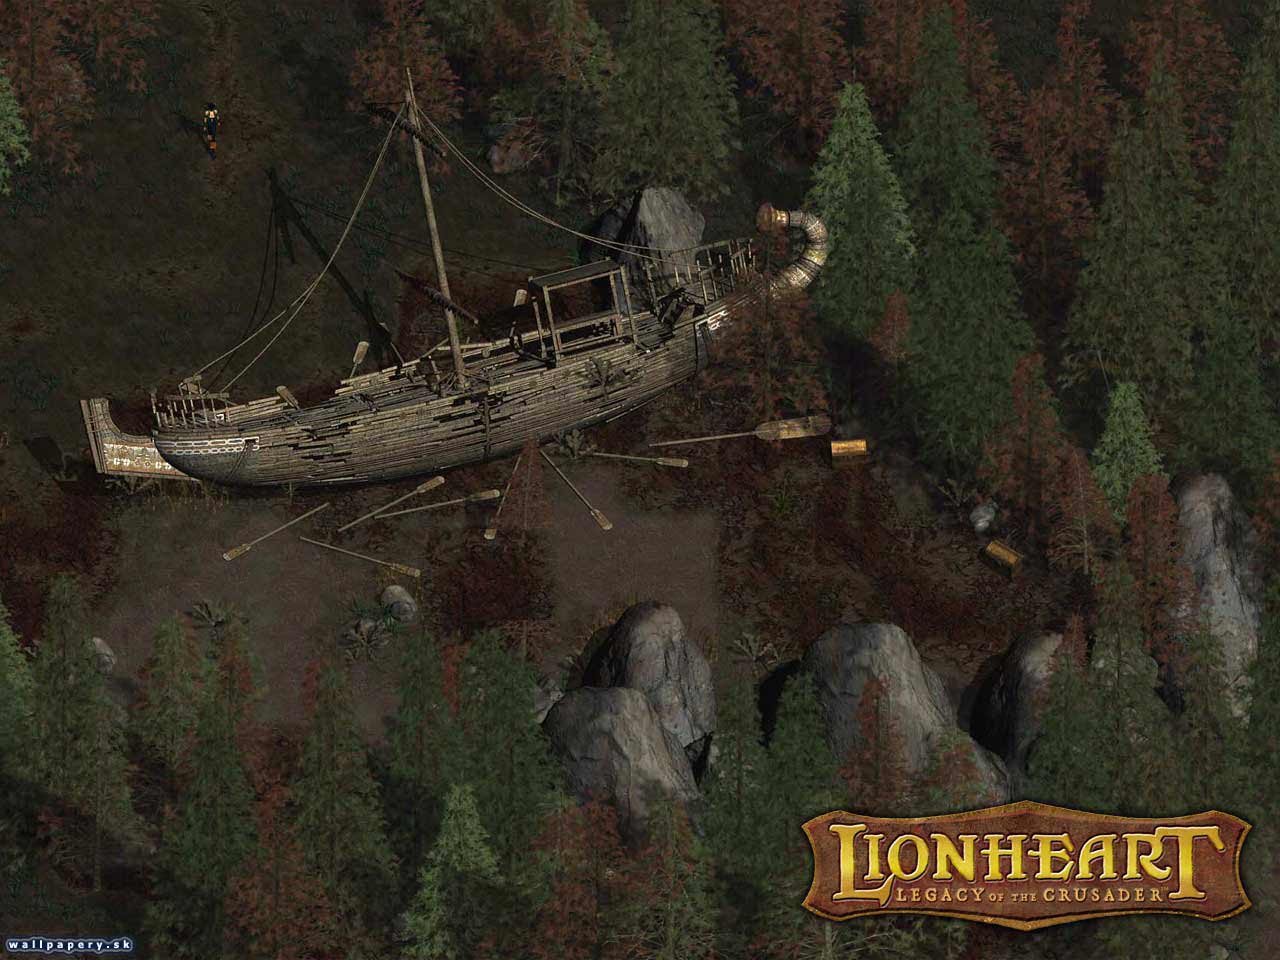 Lionheart: Legacy of the Crusader - wallpaper 2